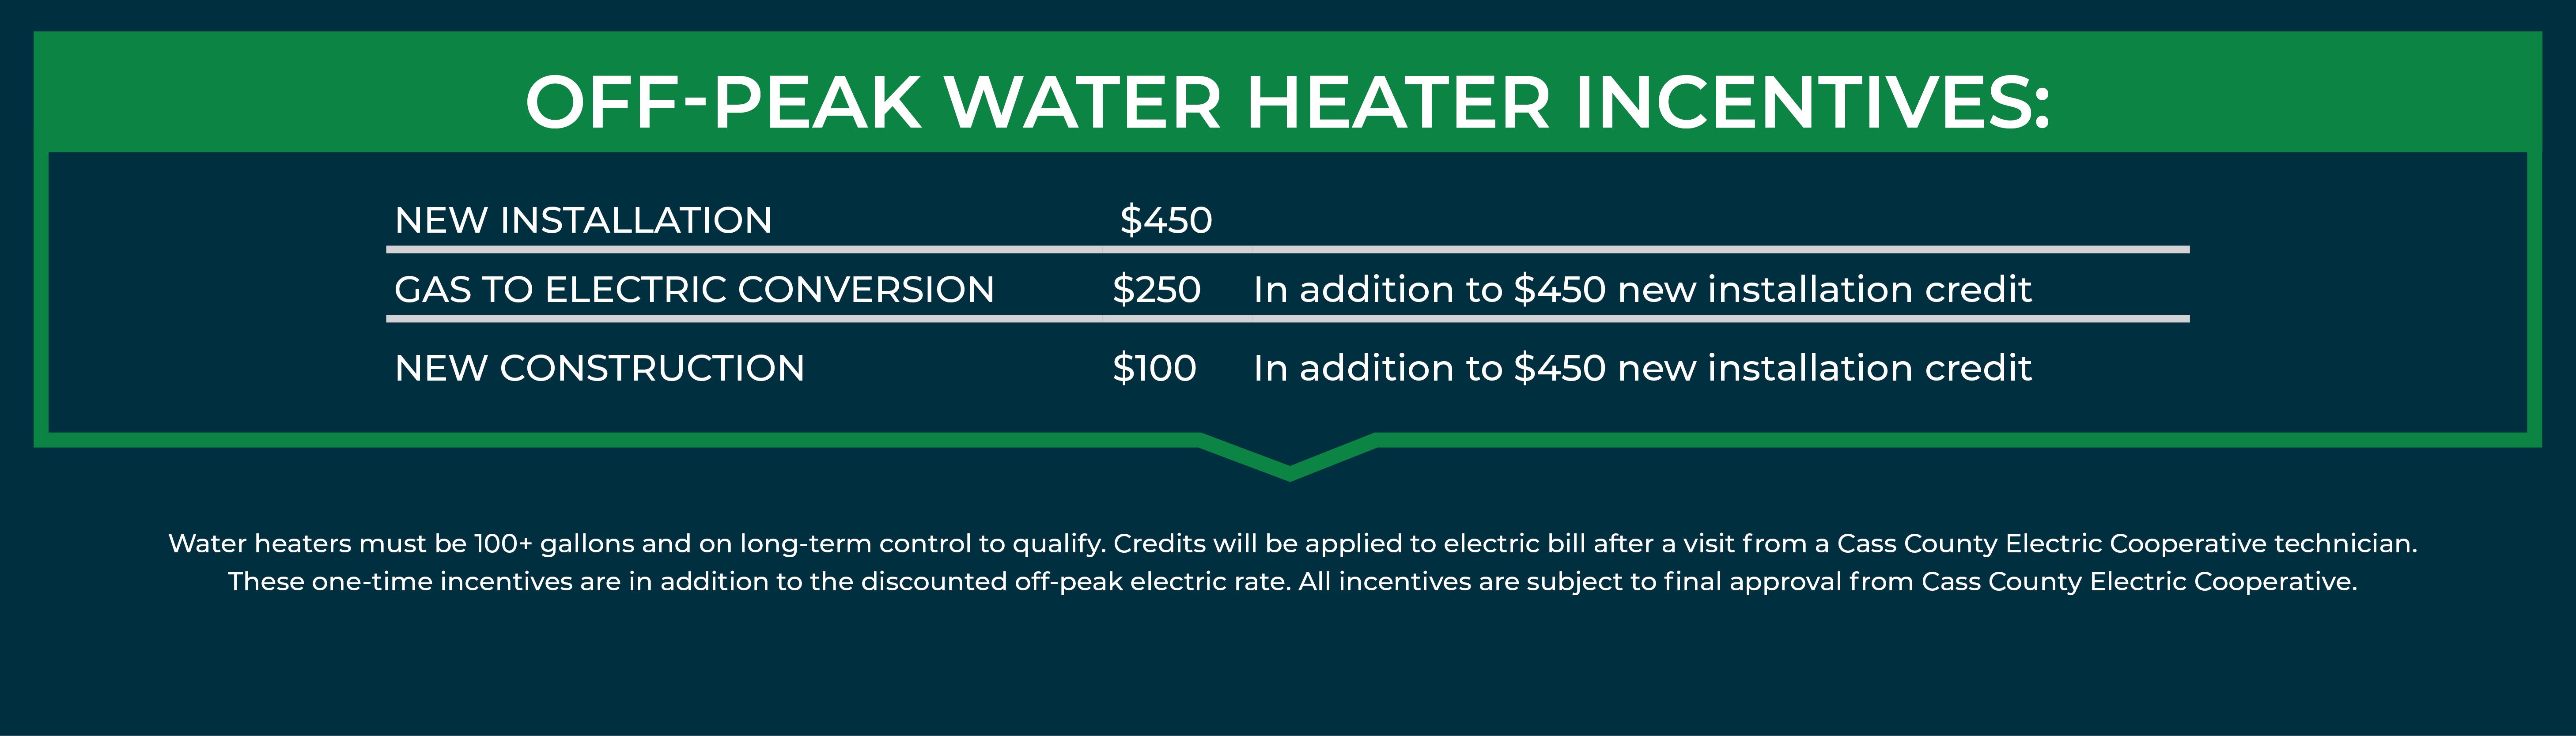 Off Peak water heater Incentives